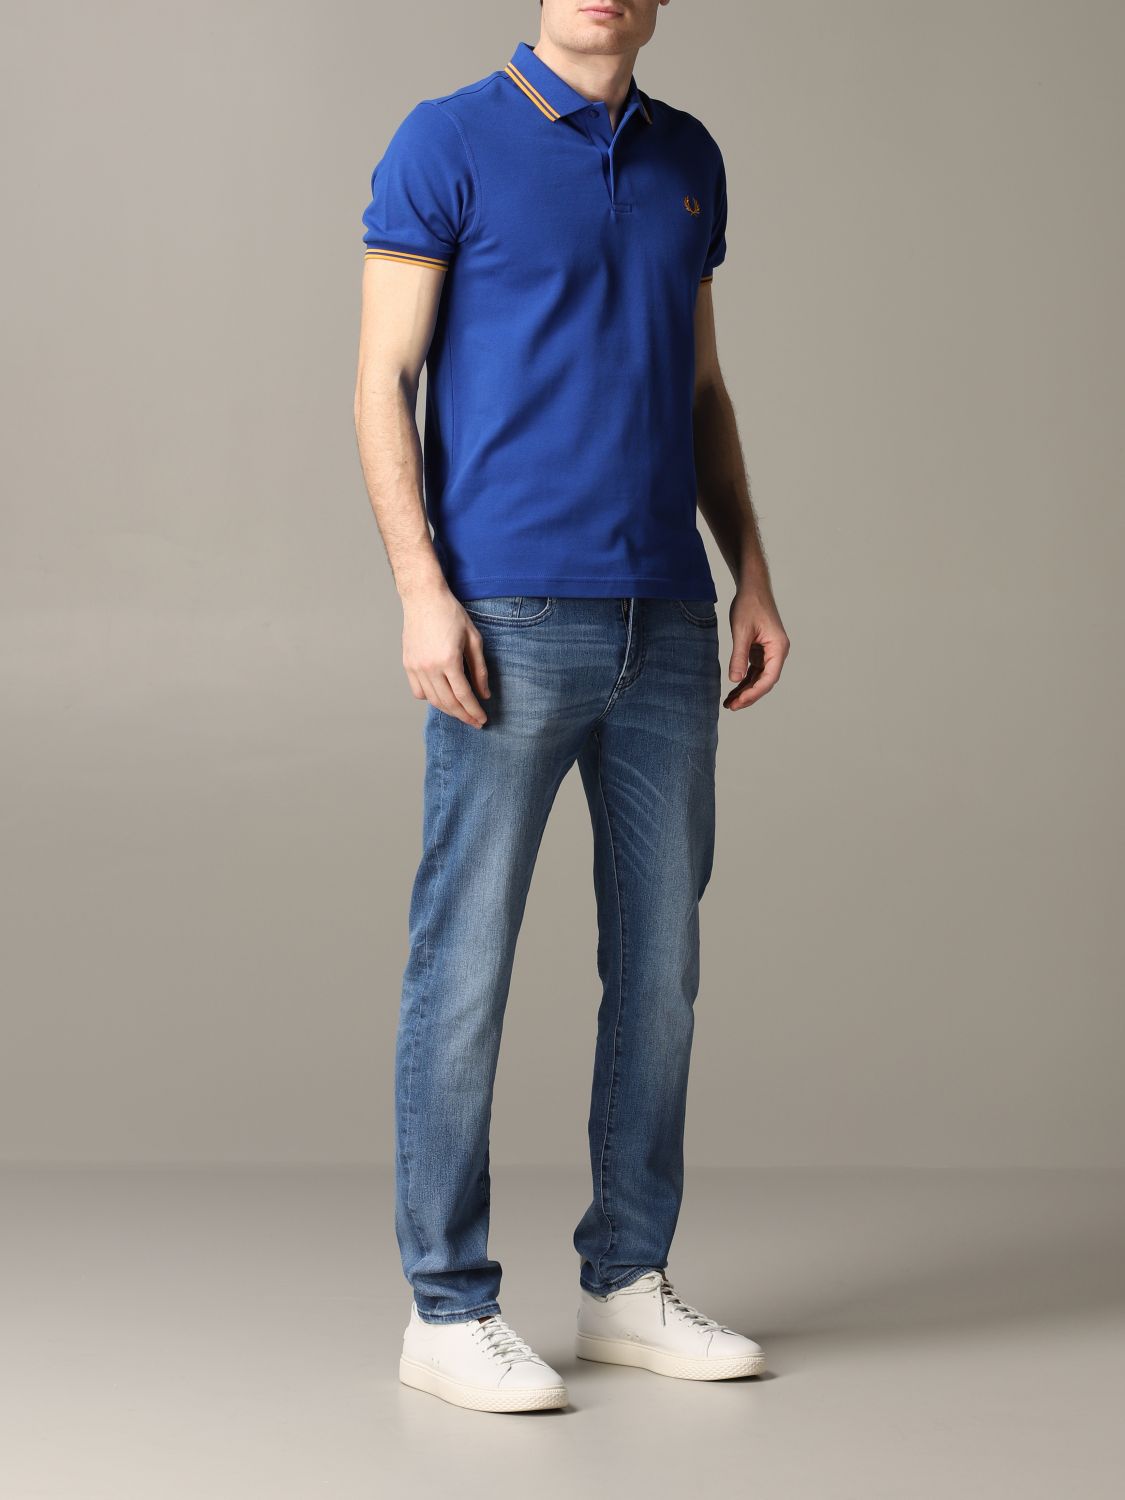 Fred Perry Outlet: polo shirt for man - Royal Blue | Fred Perry polo ...